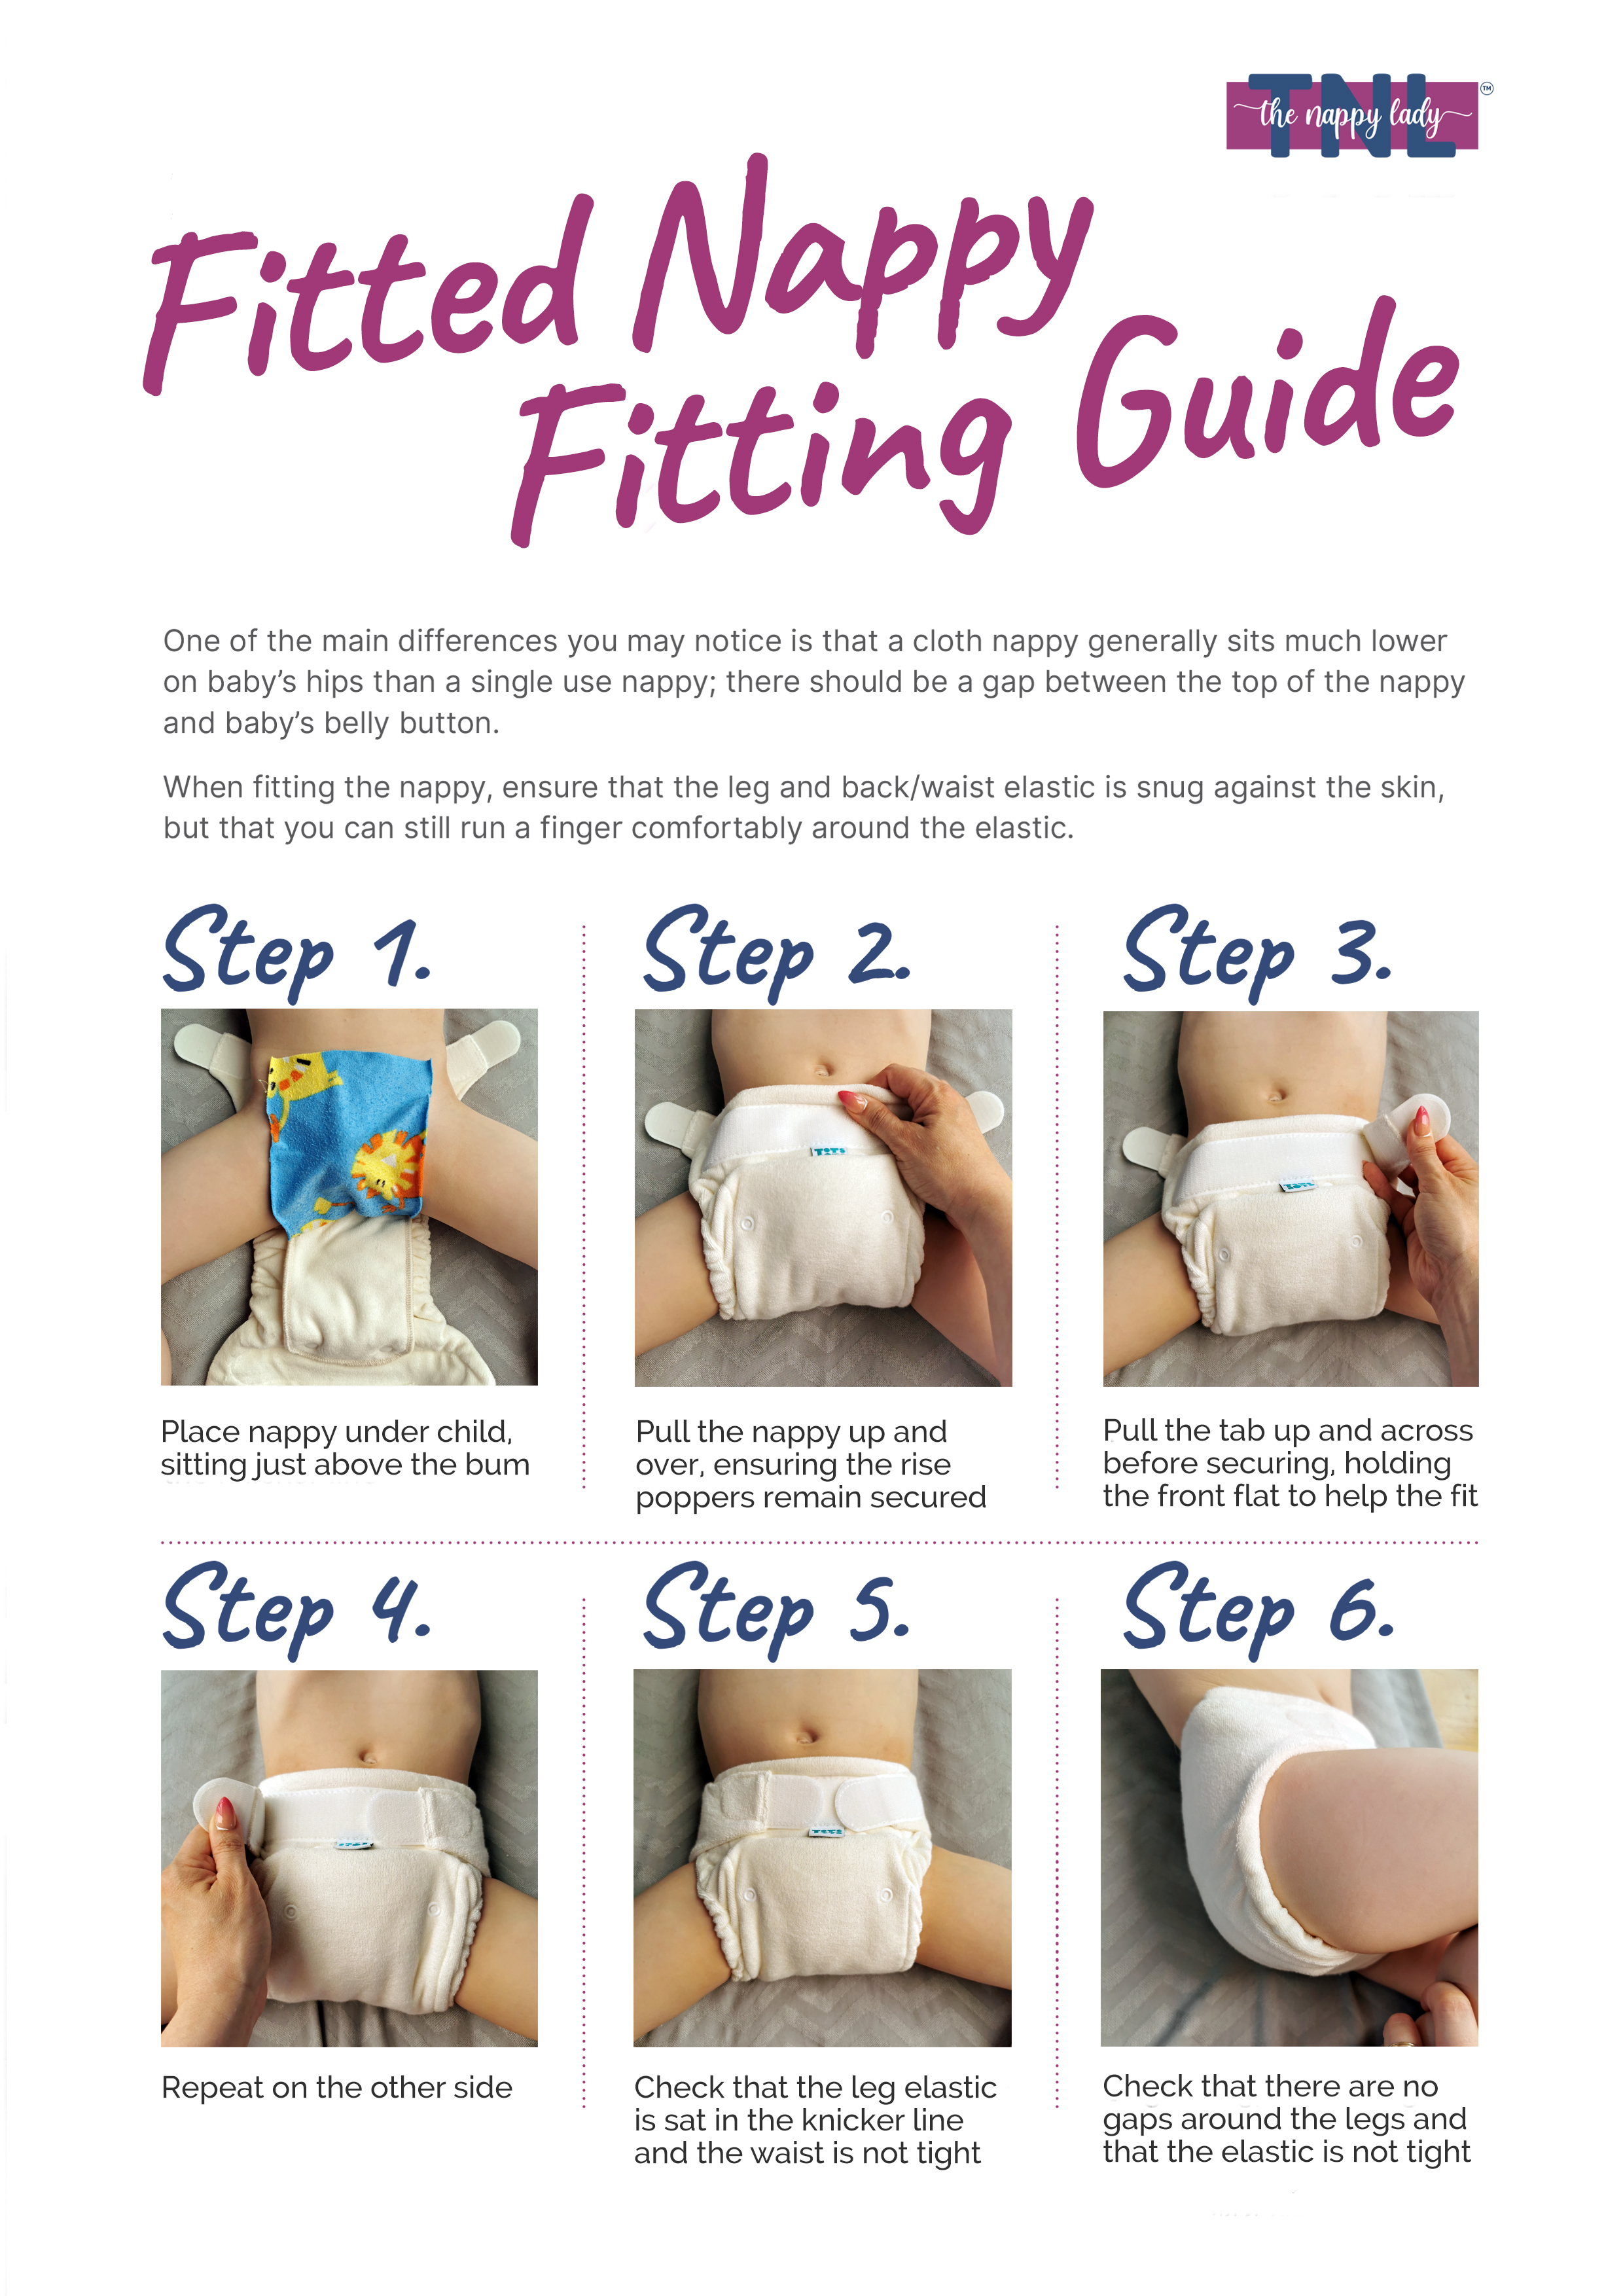 TNL's Fitted Nappy Fitting Guide